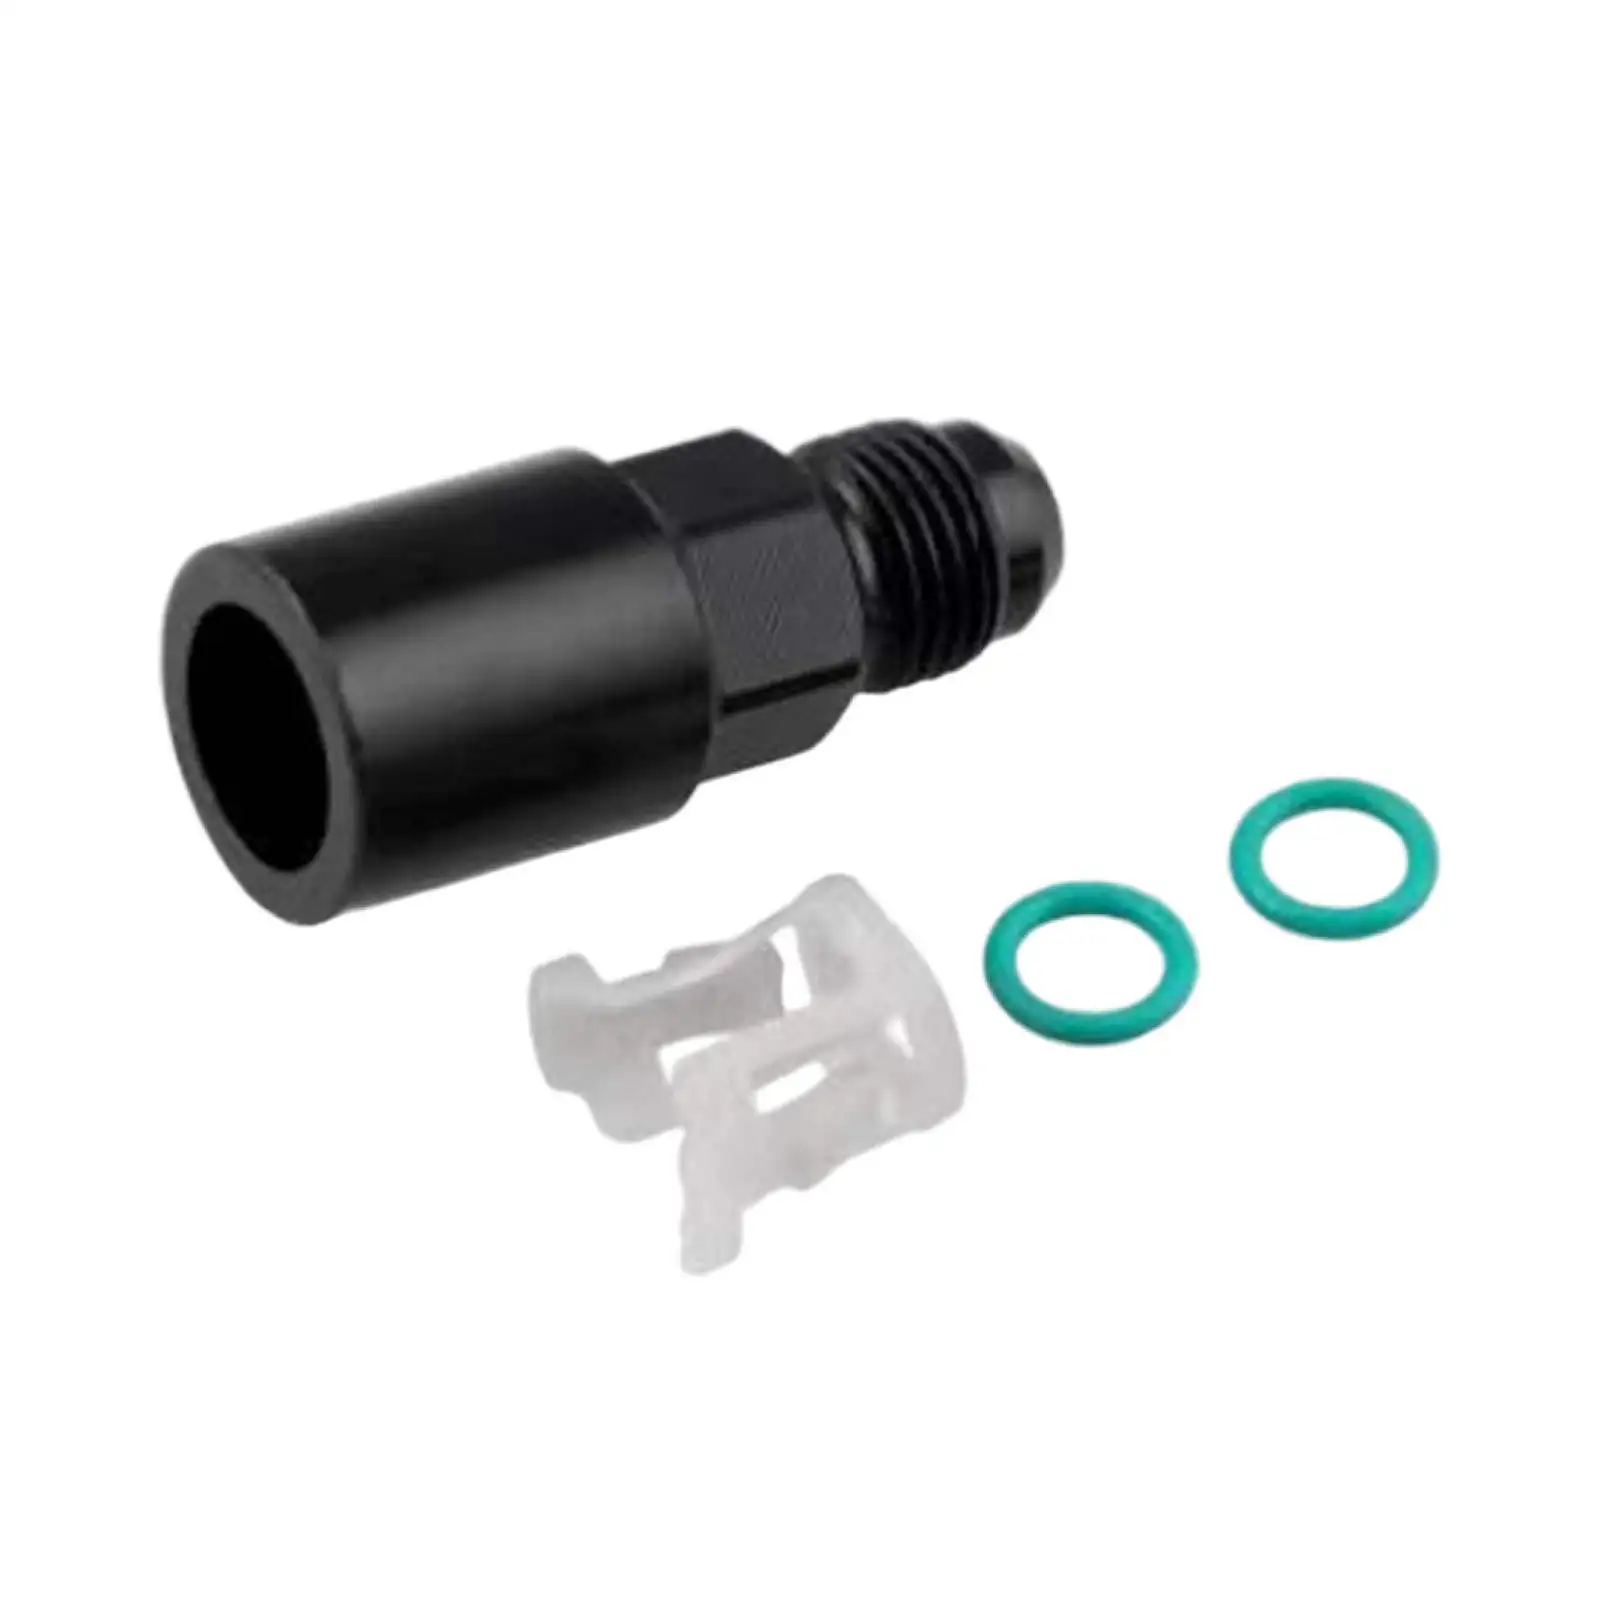 Fuel Adapter Fitting 6AN to 5/16 GM LS W/ Clip Female Fuel Distribution Pipe Joint for Fuel Rail Quick Connect Fitting